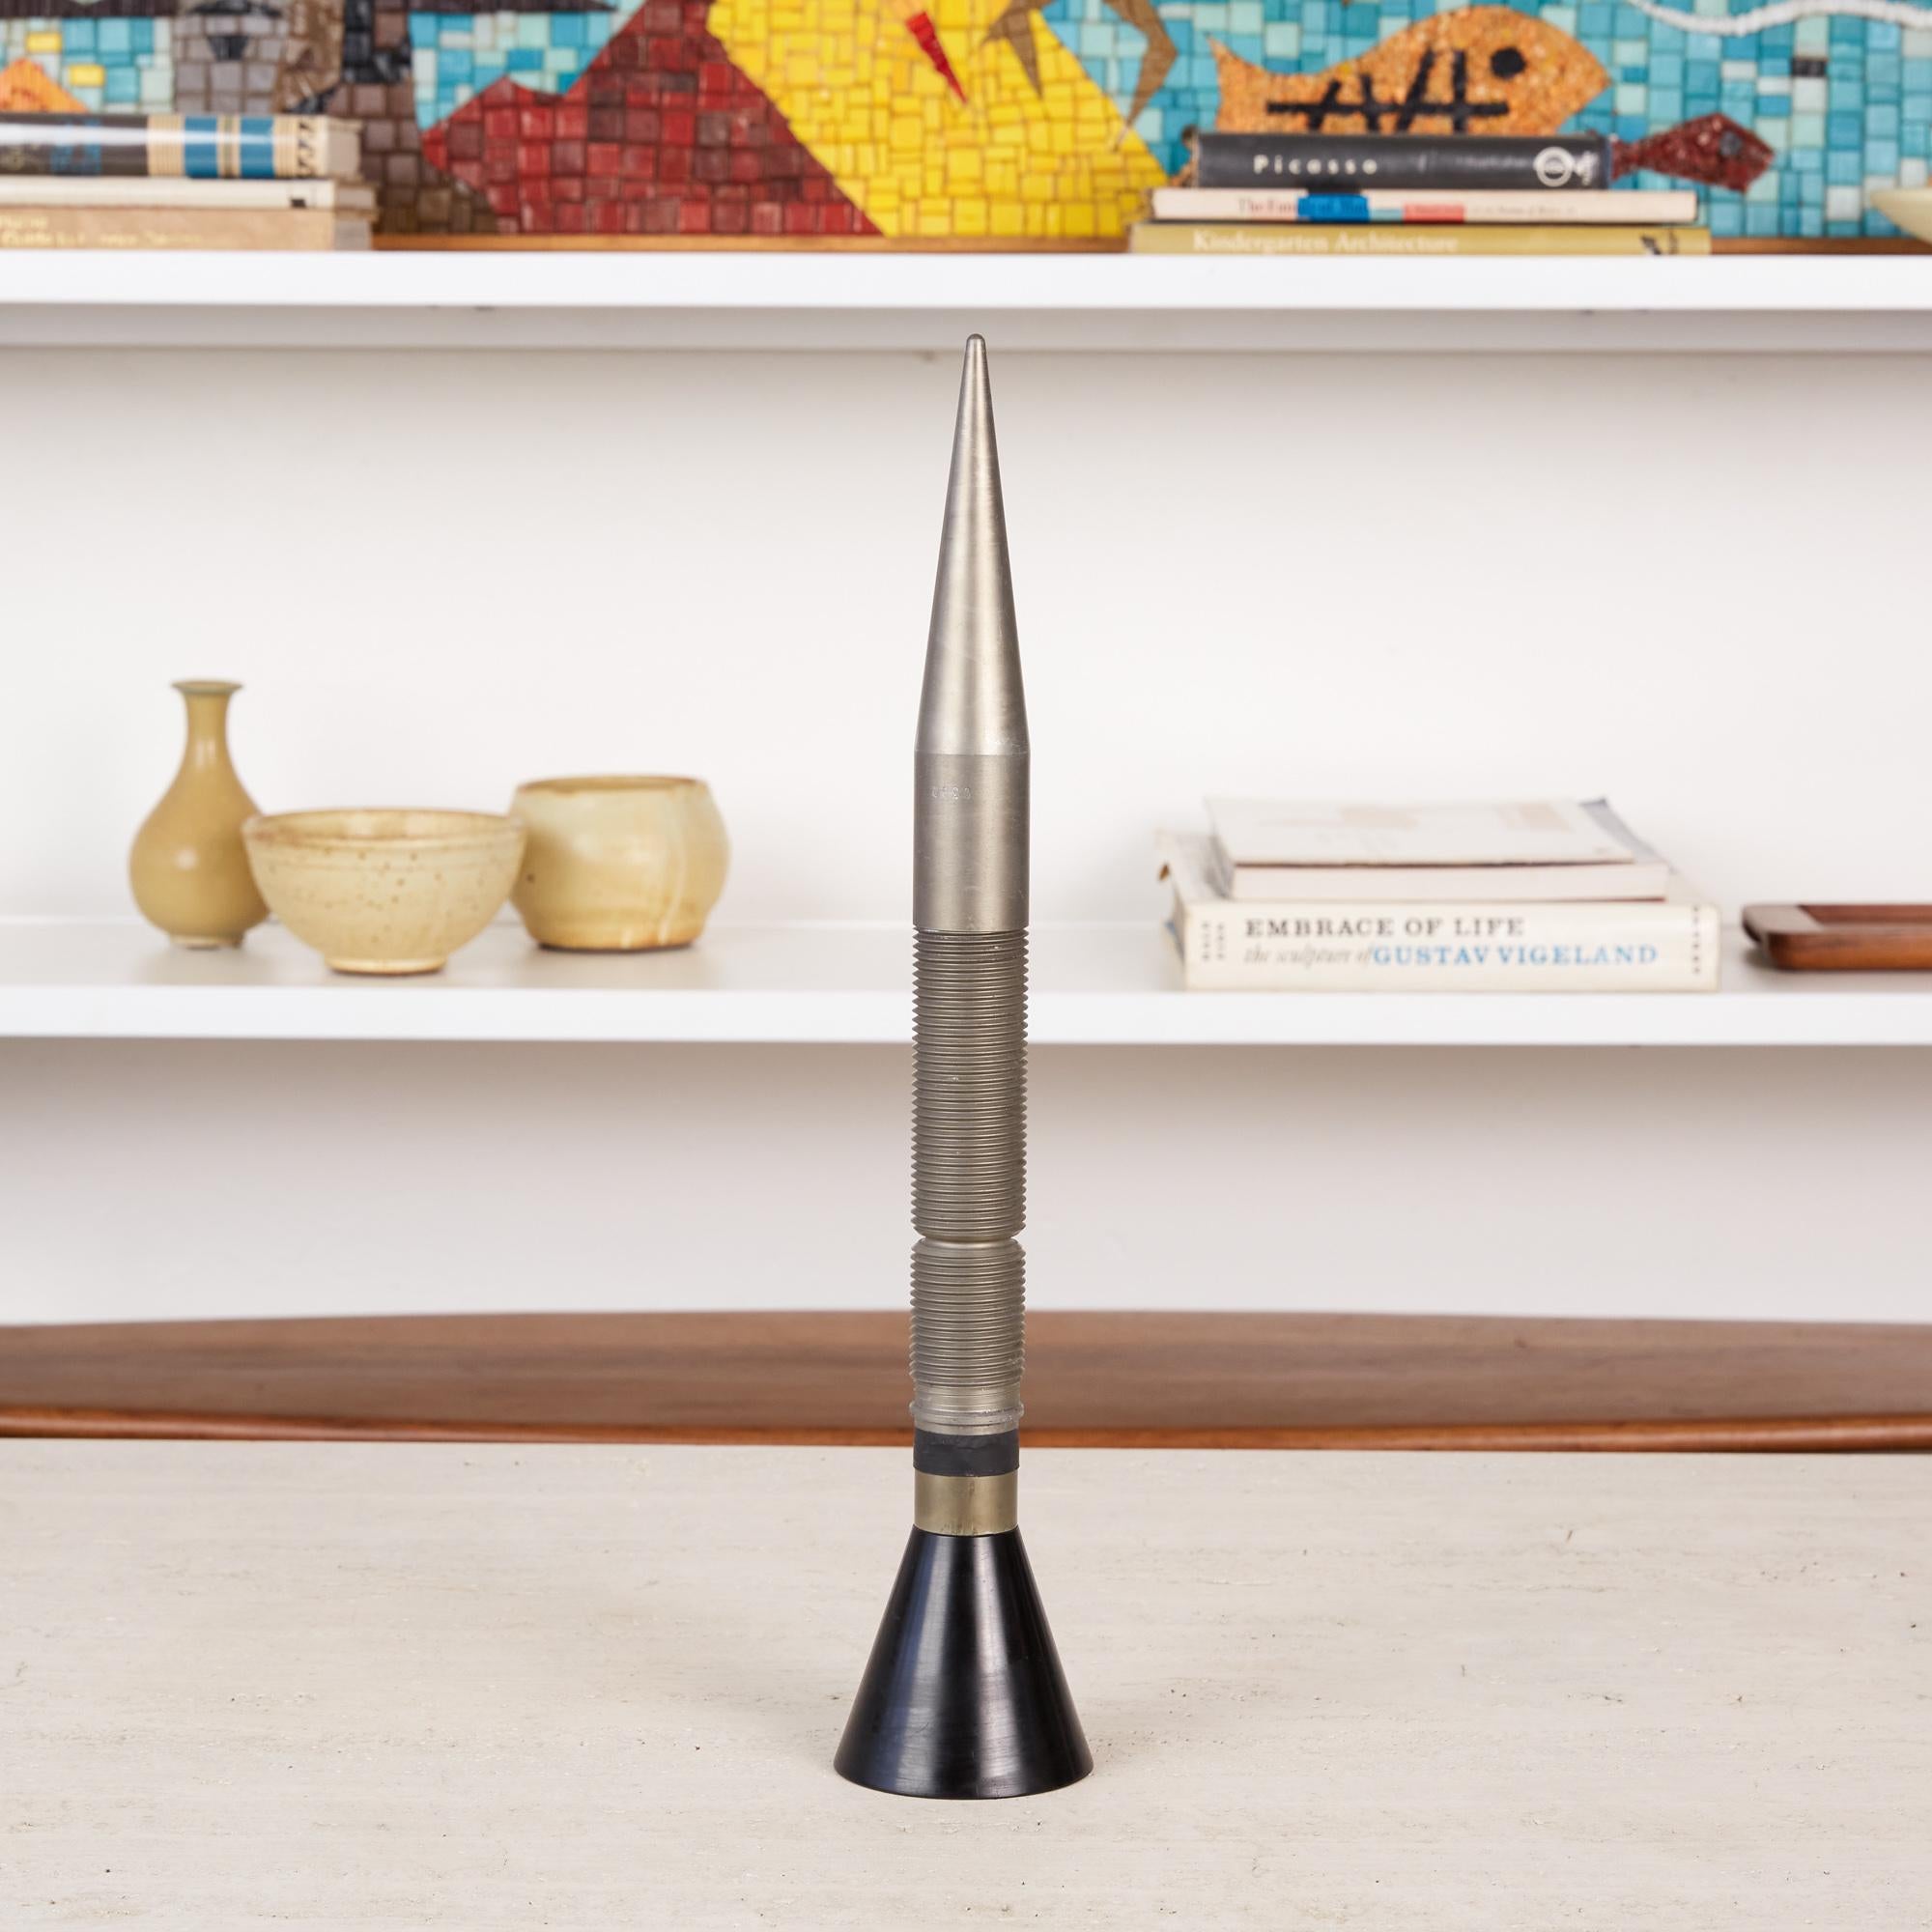 Utilizing components one would typically find in a machinists shop, this abstracted steel rocket is composed of a large steel machine screw that sits atop a black fluted base and has rubber detailing just before the threading begins on the rocket